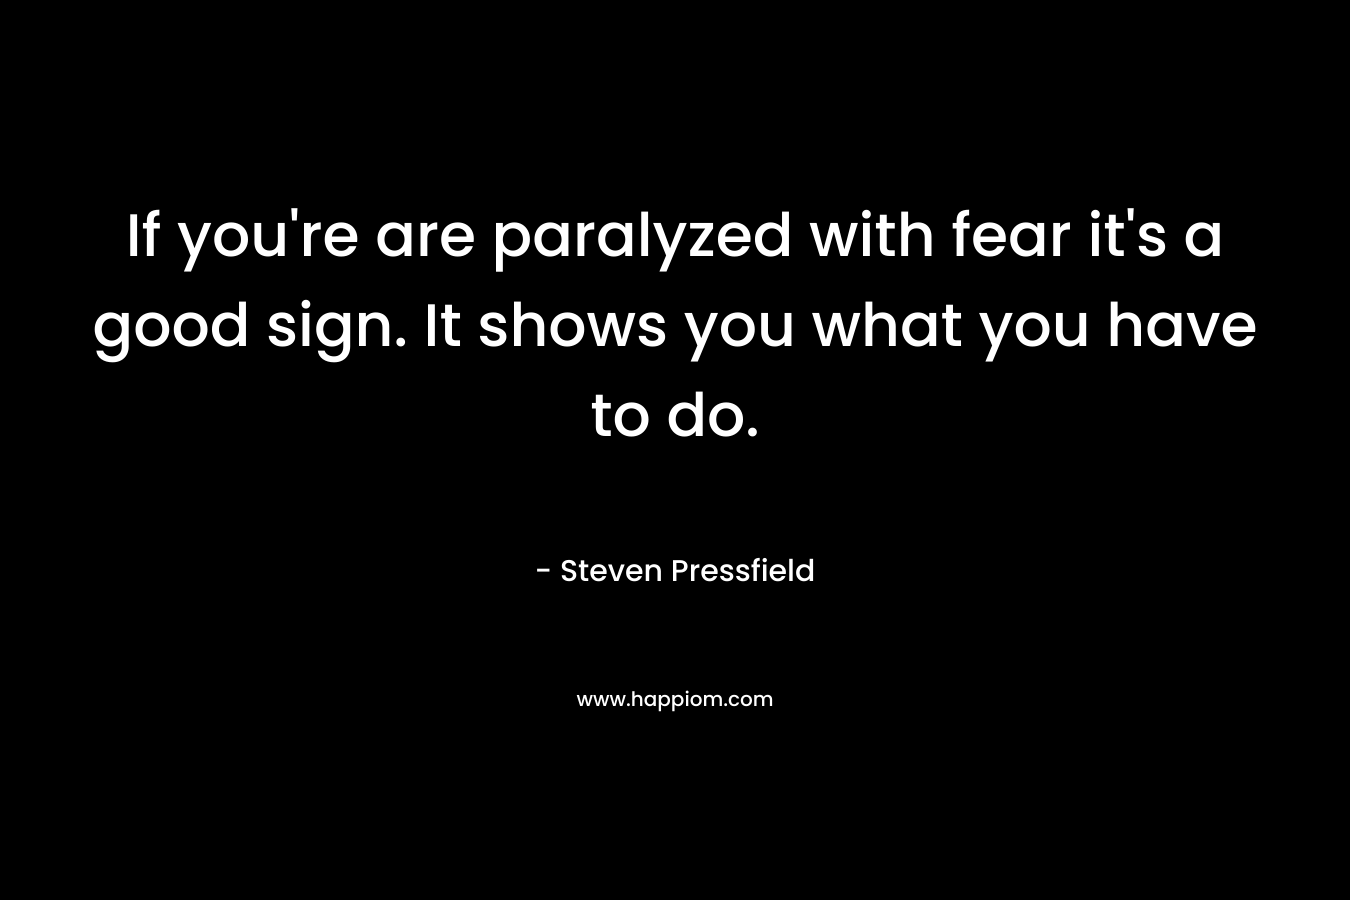 If you're are paralyzed with fear it's a good sign. It shows you what you have to do.